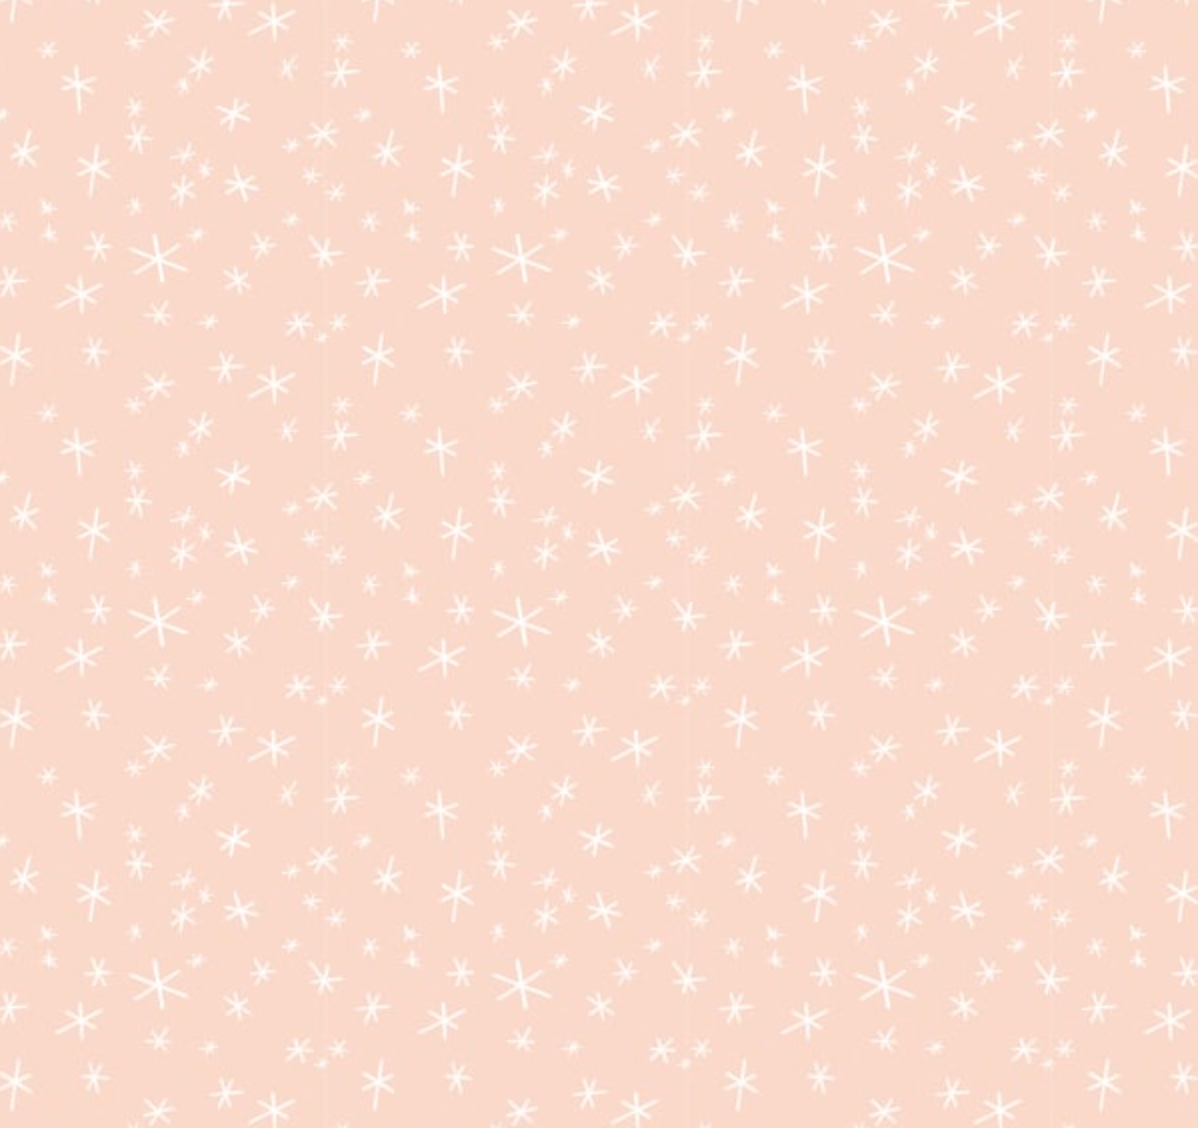 Scattered Stars in Blush - Weave & Woven